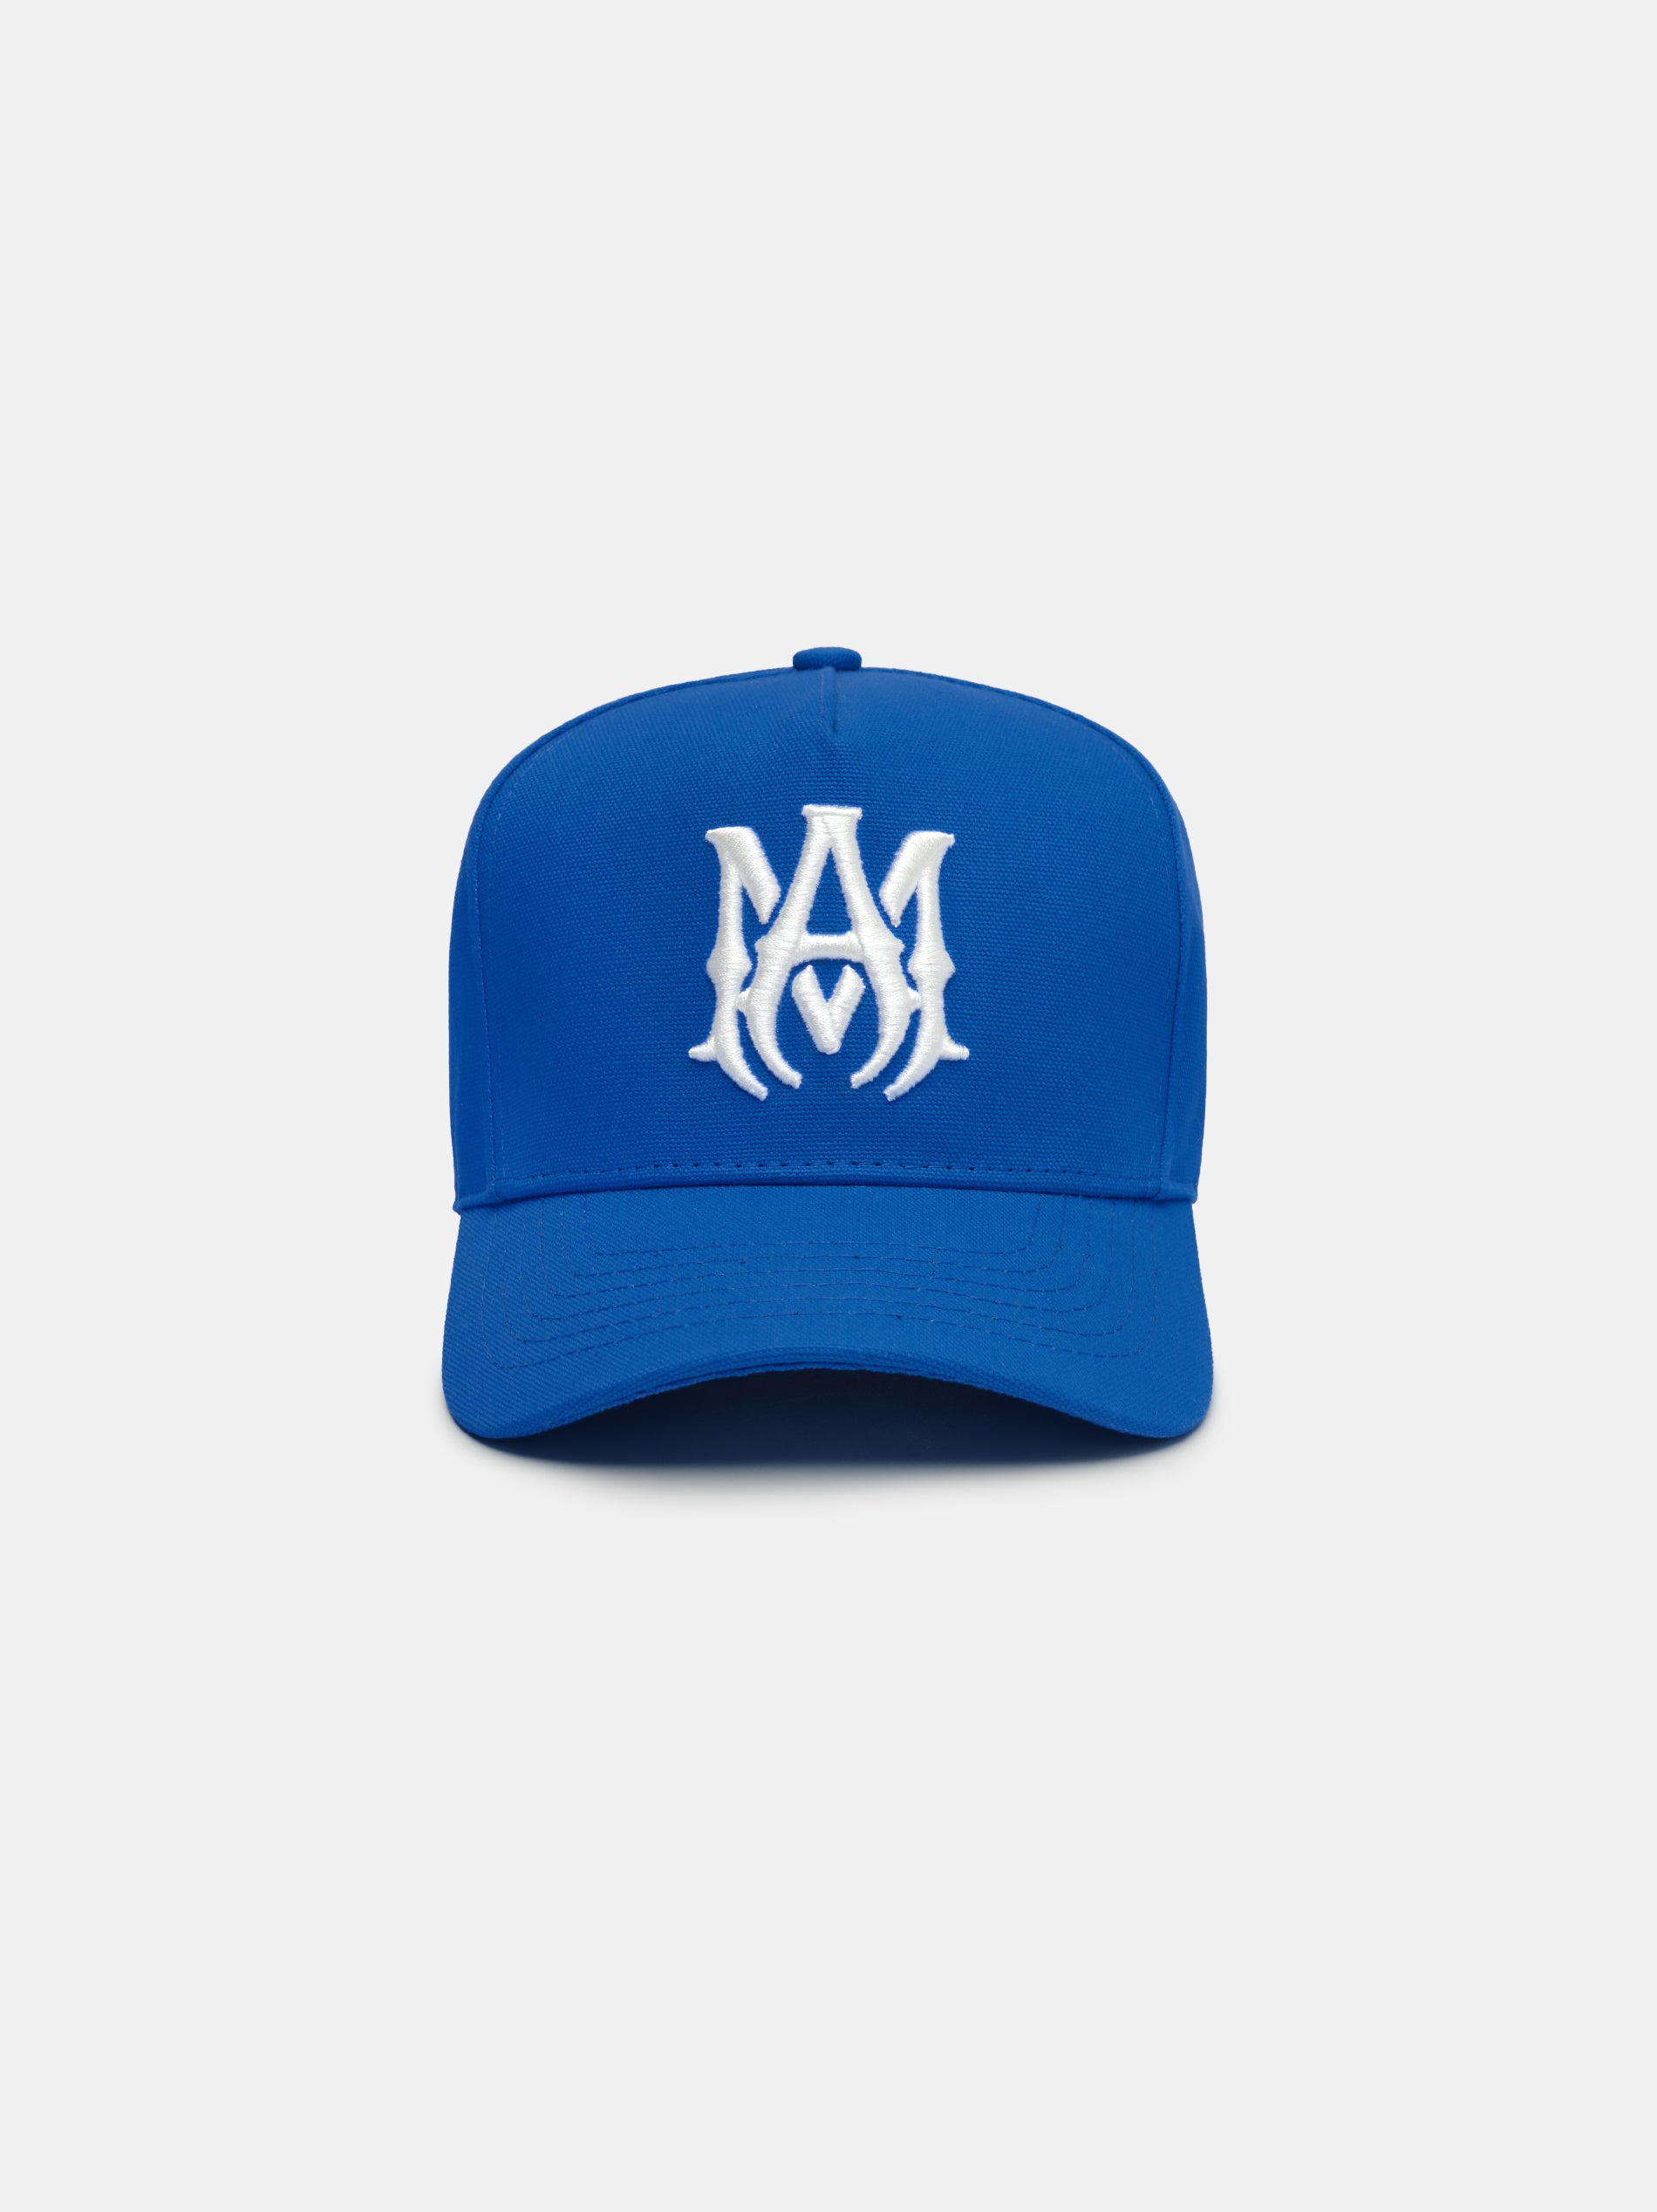 Product FULL CANVAS MA HAT - Blue featured image